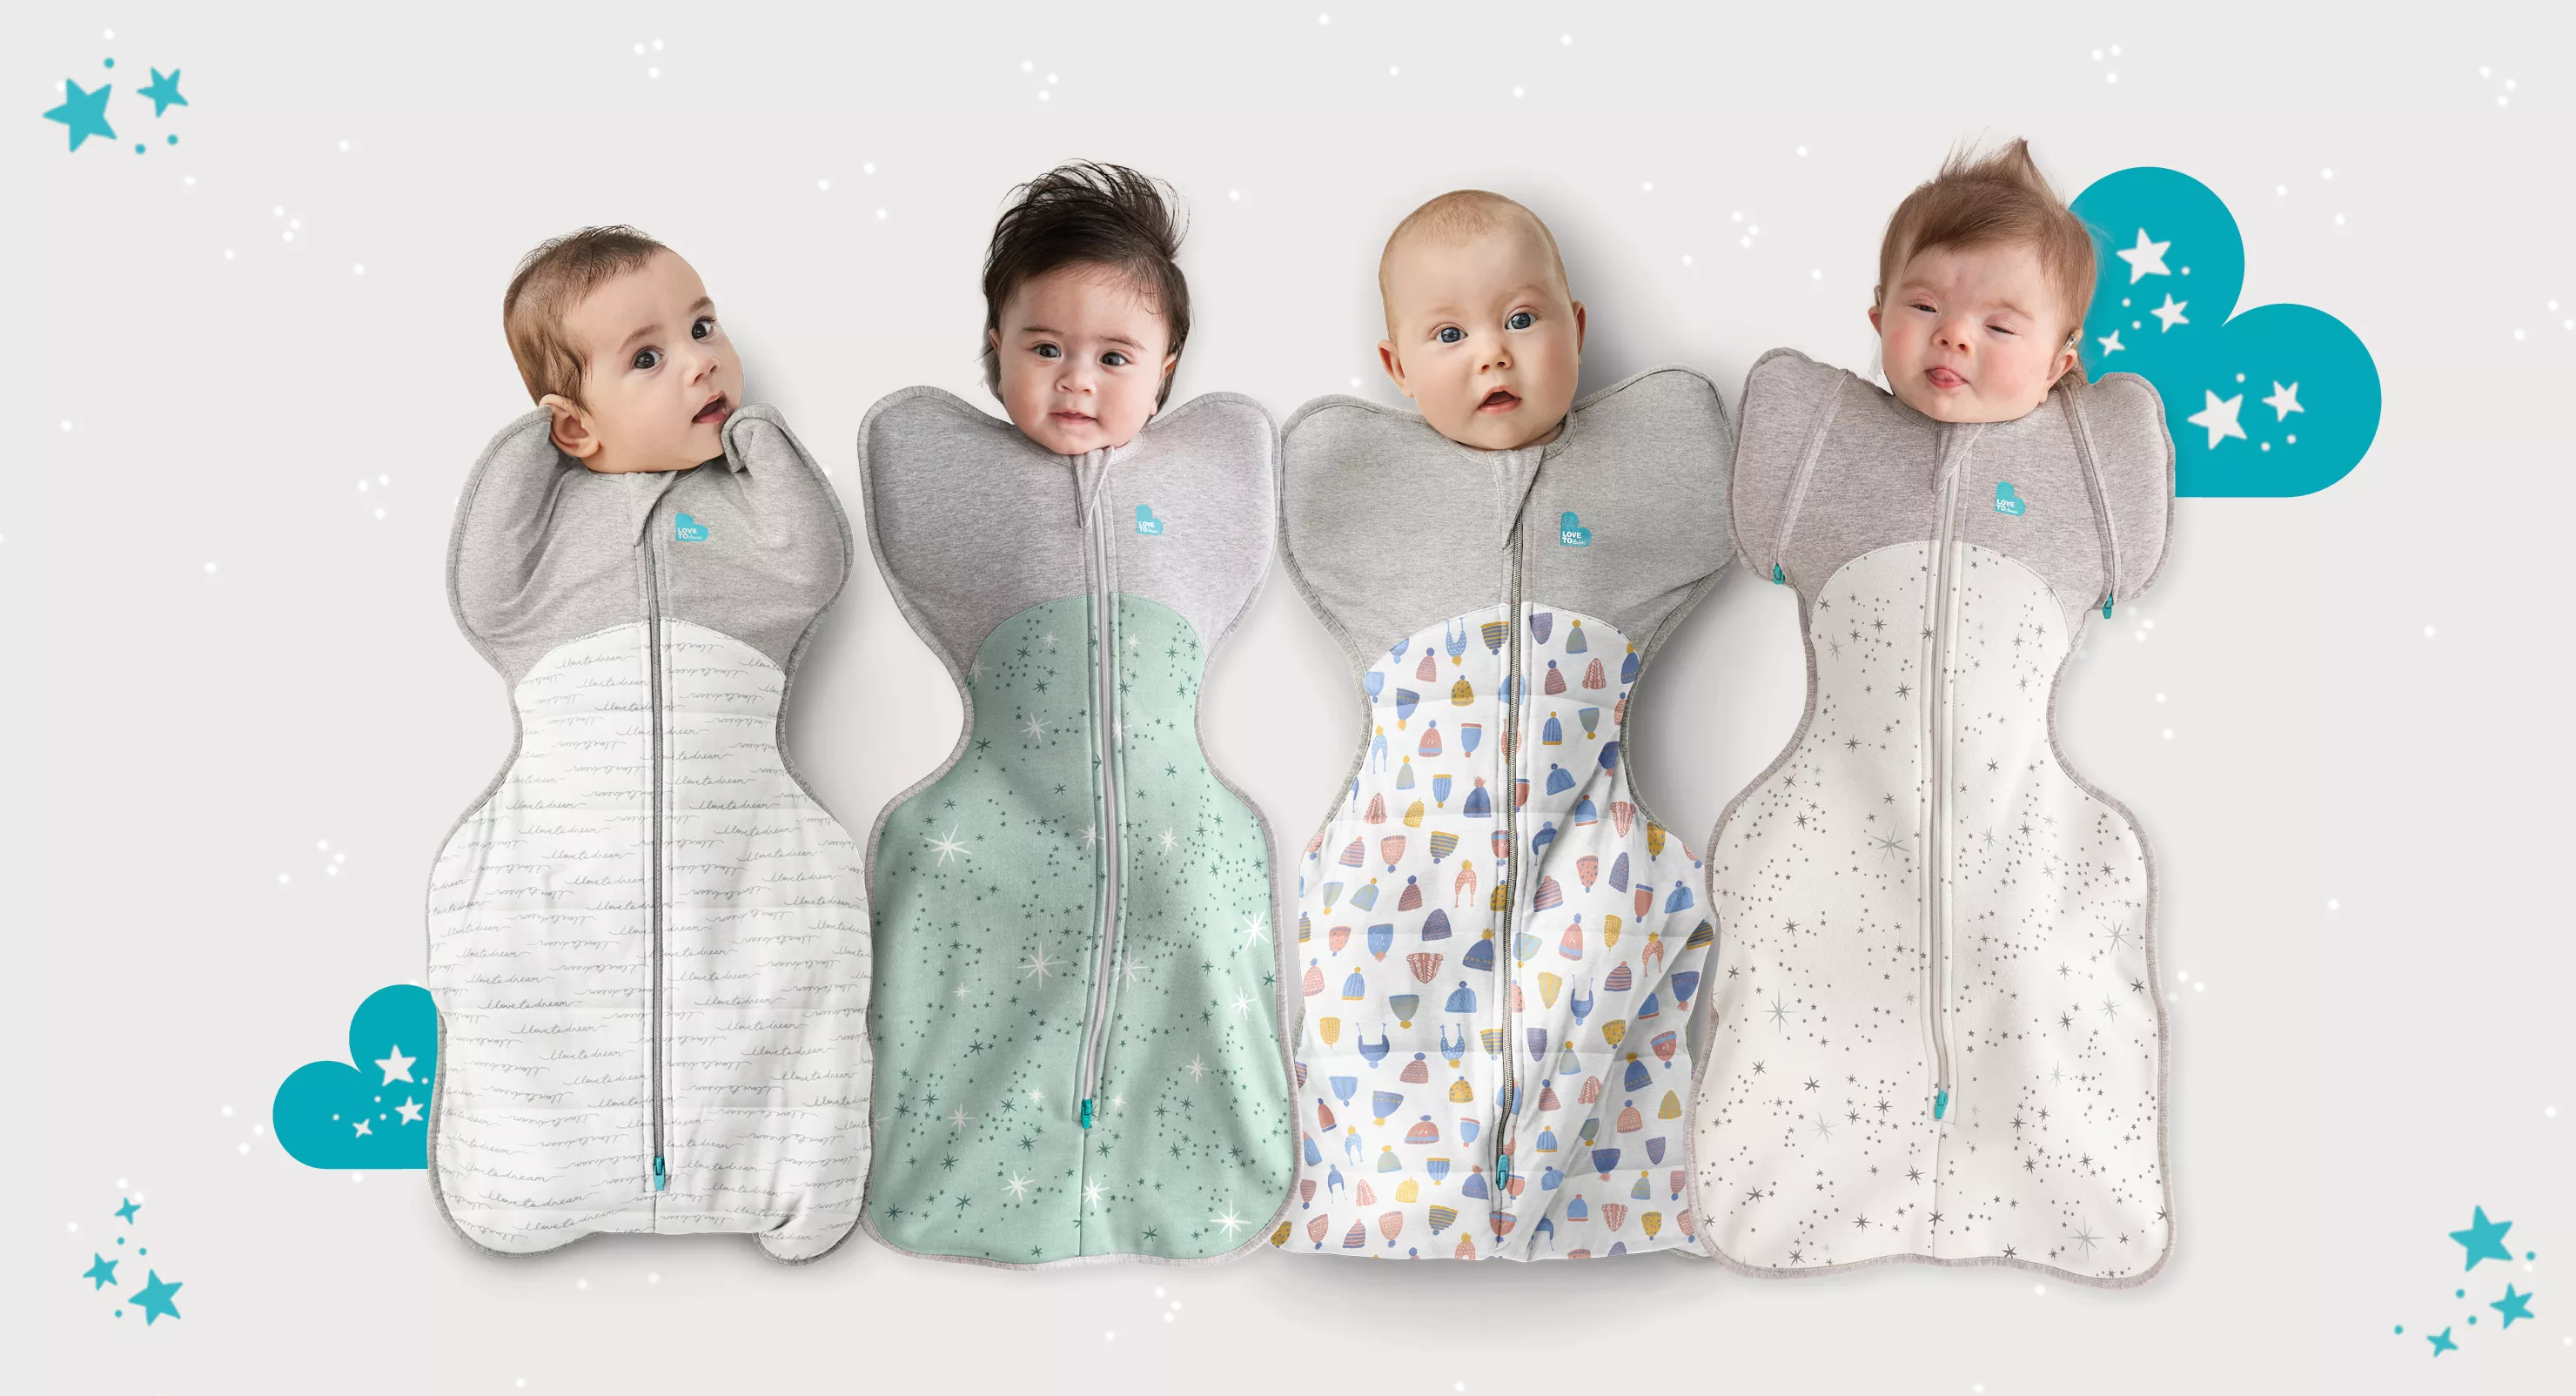 How To Dress A Baby In Winter For Sleep